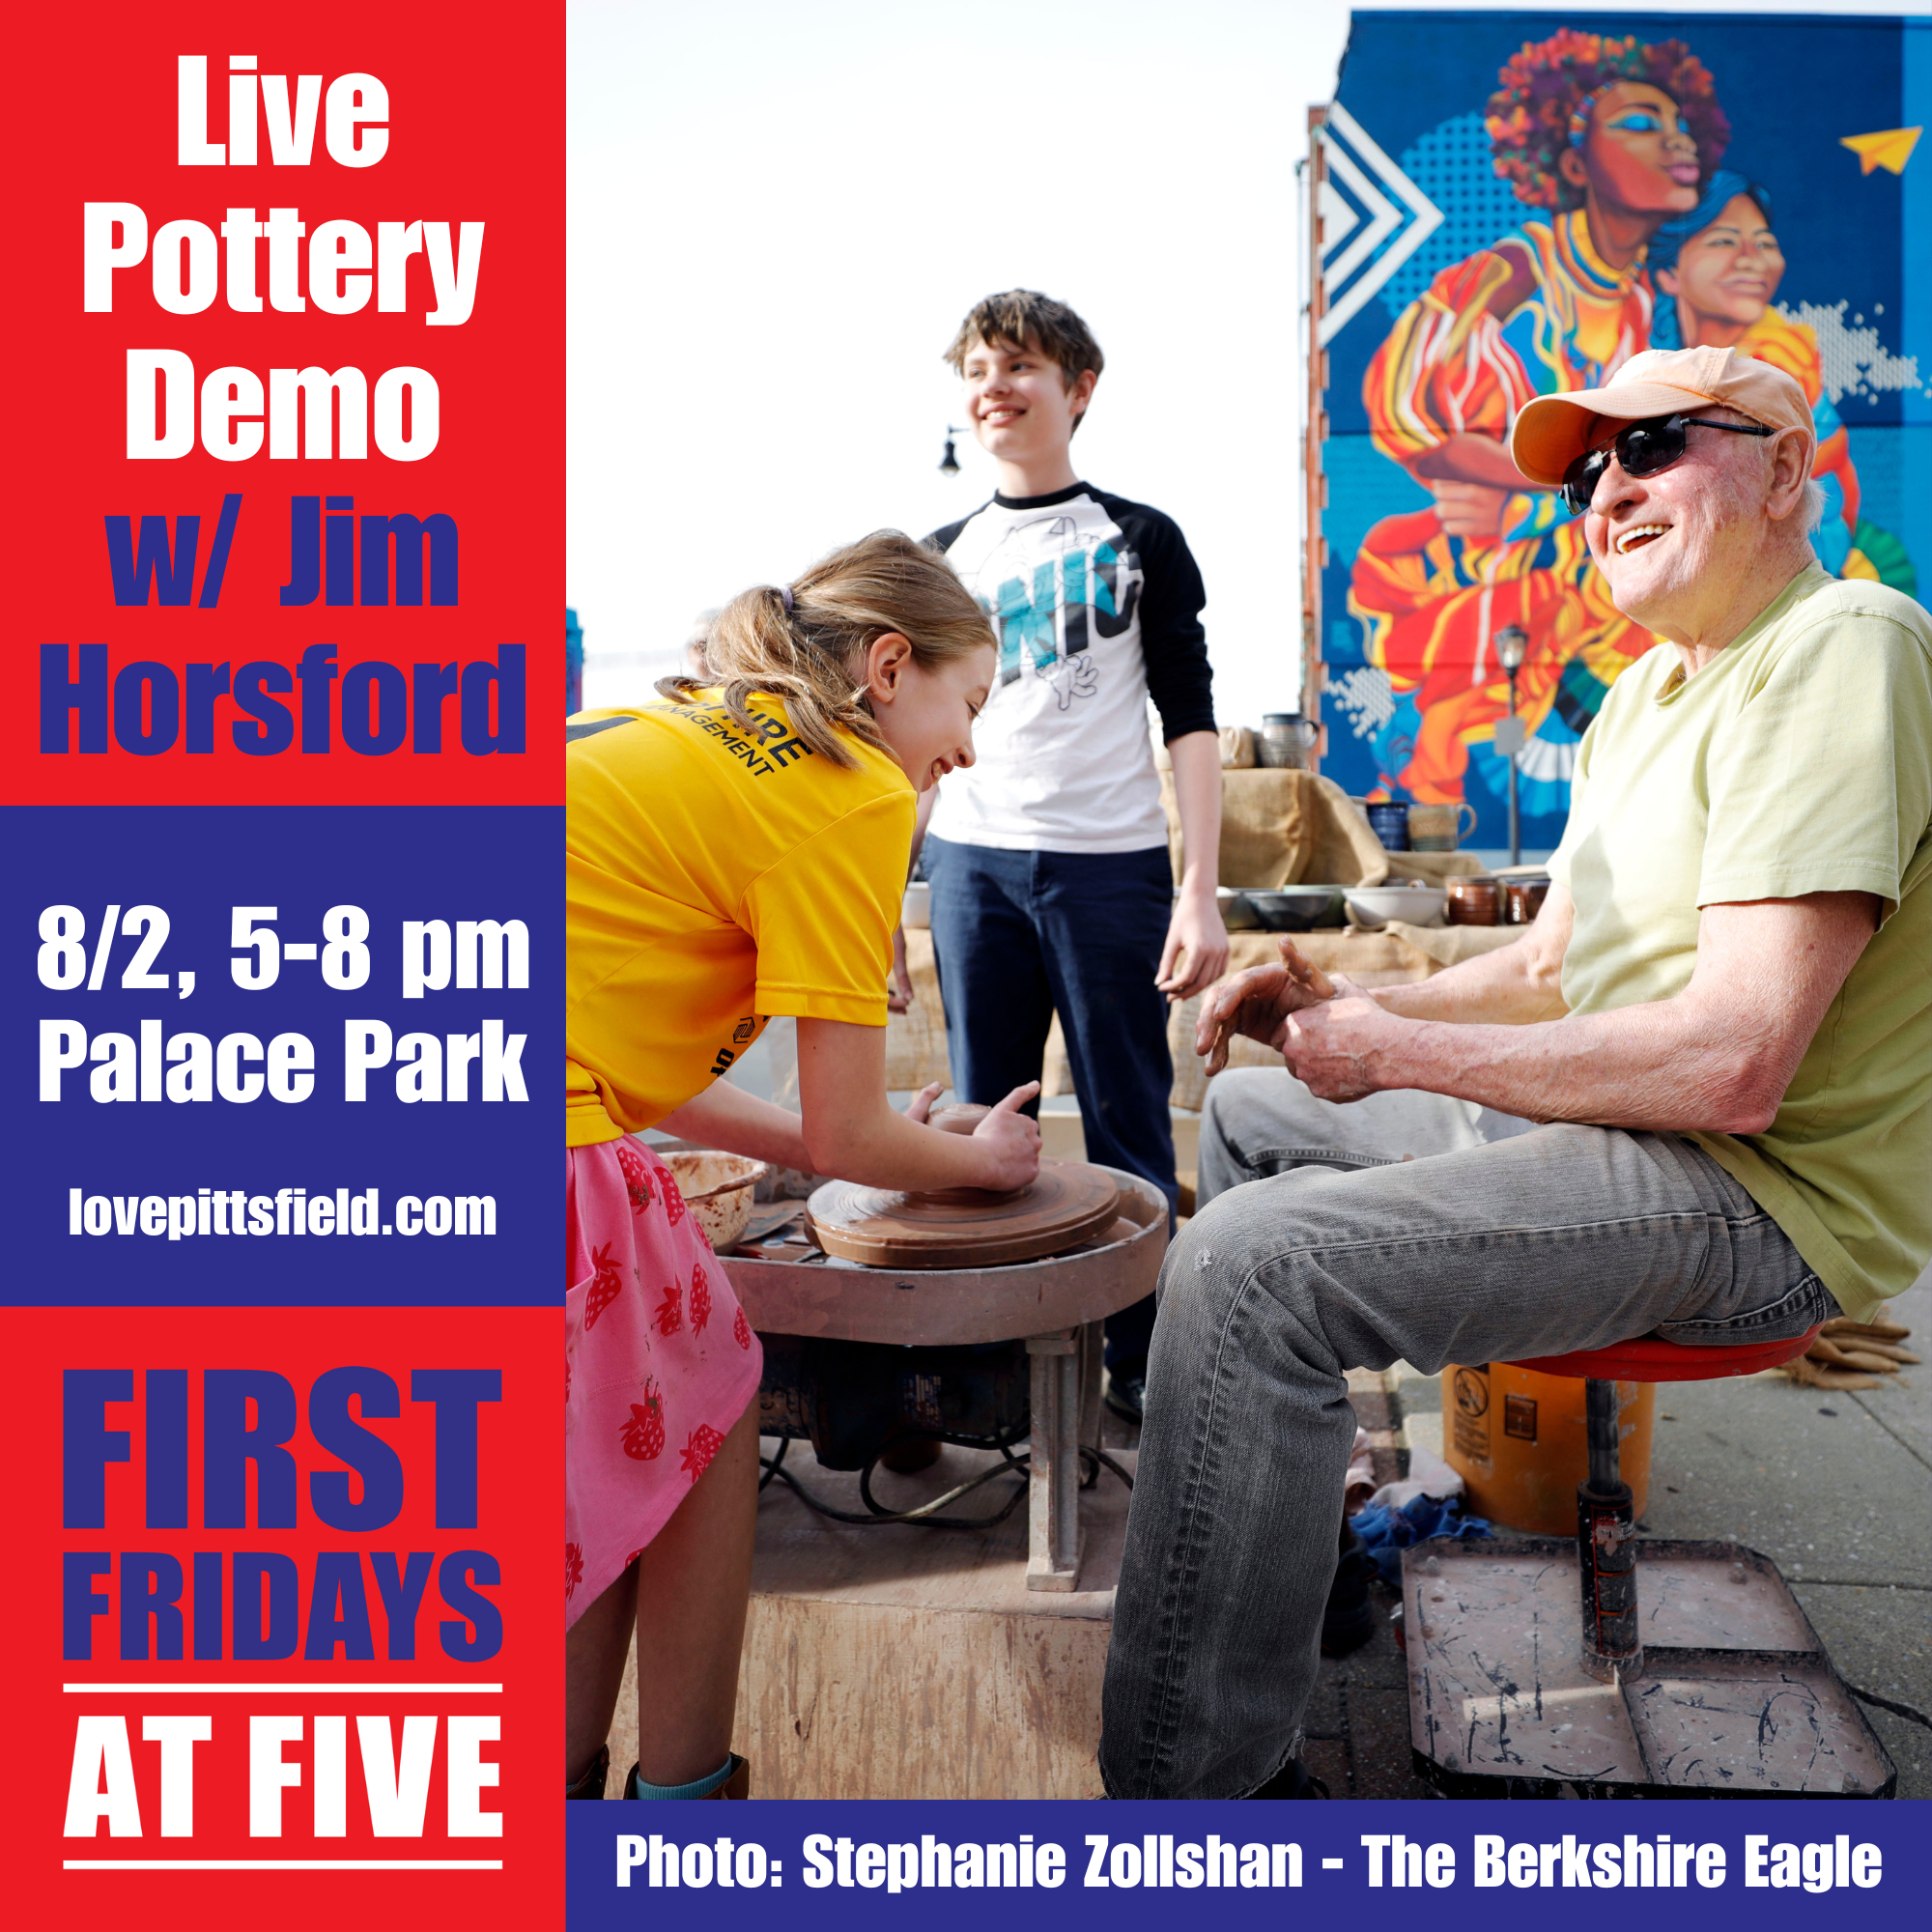 Live Pottery Demonstration with Jim Horsford